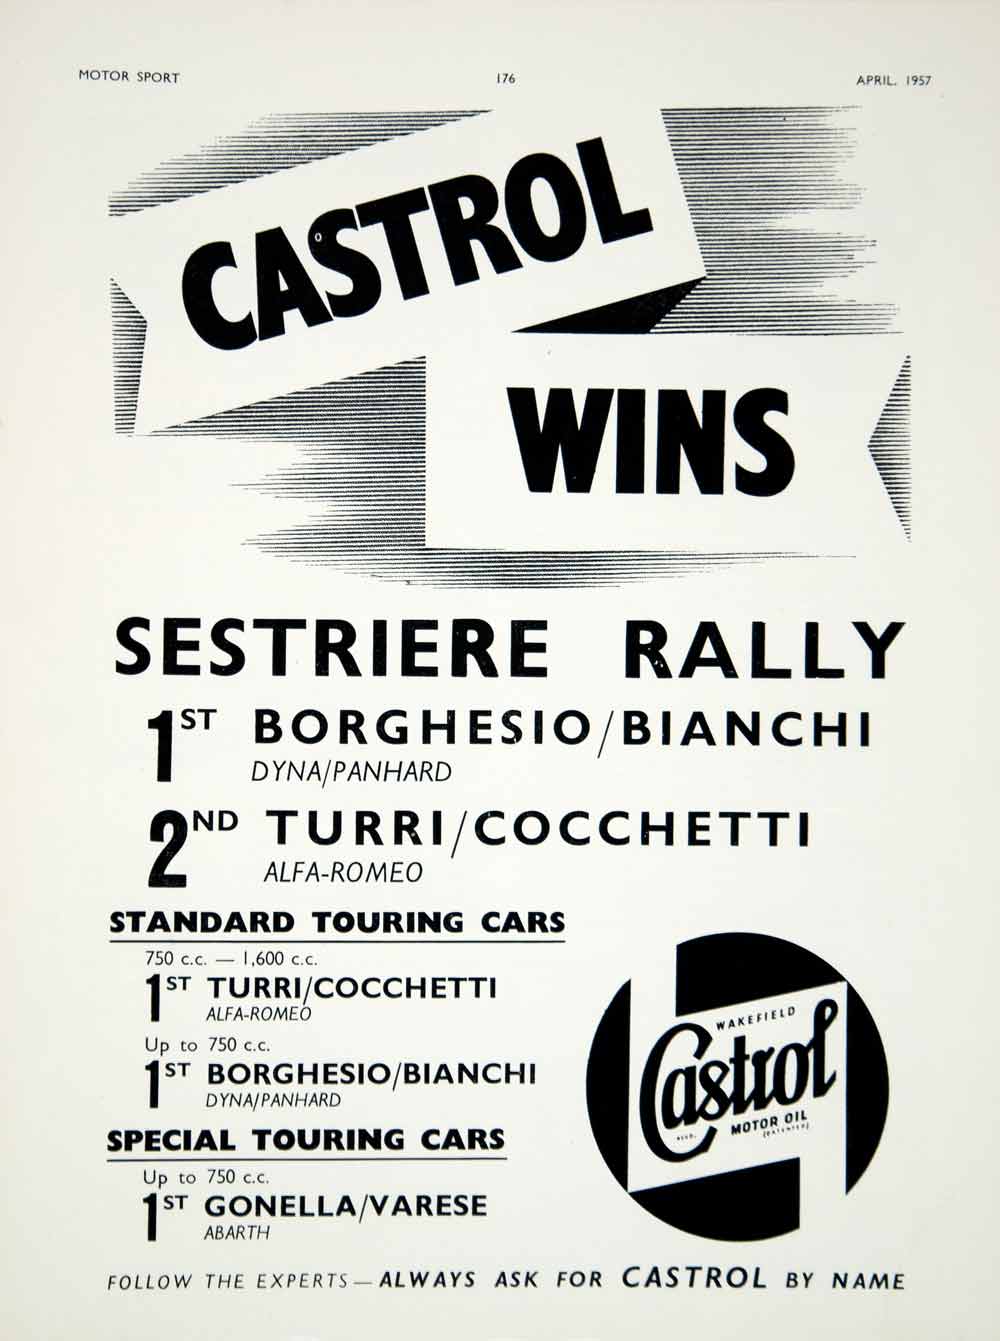 1957 Ad Castrol Motor Oil Petroleum Sestriere Rally Auto Racing Car Sports YMT2